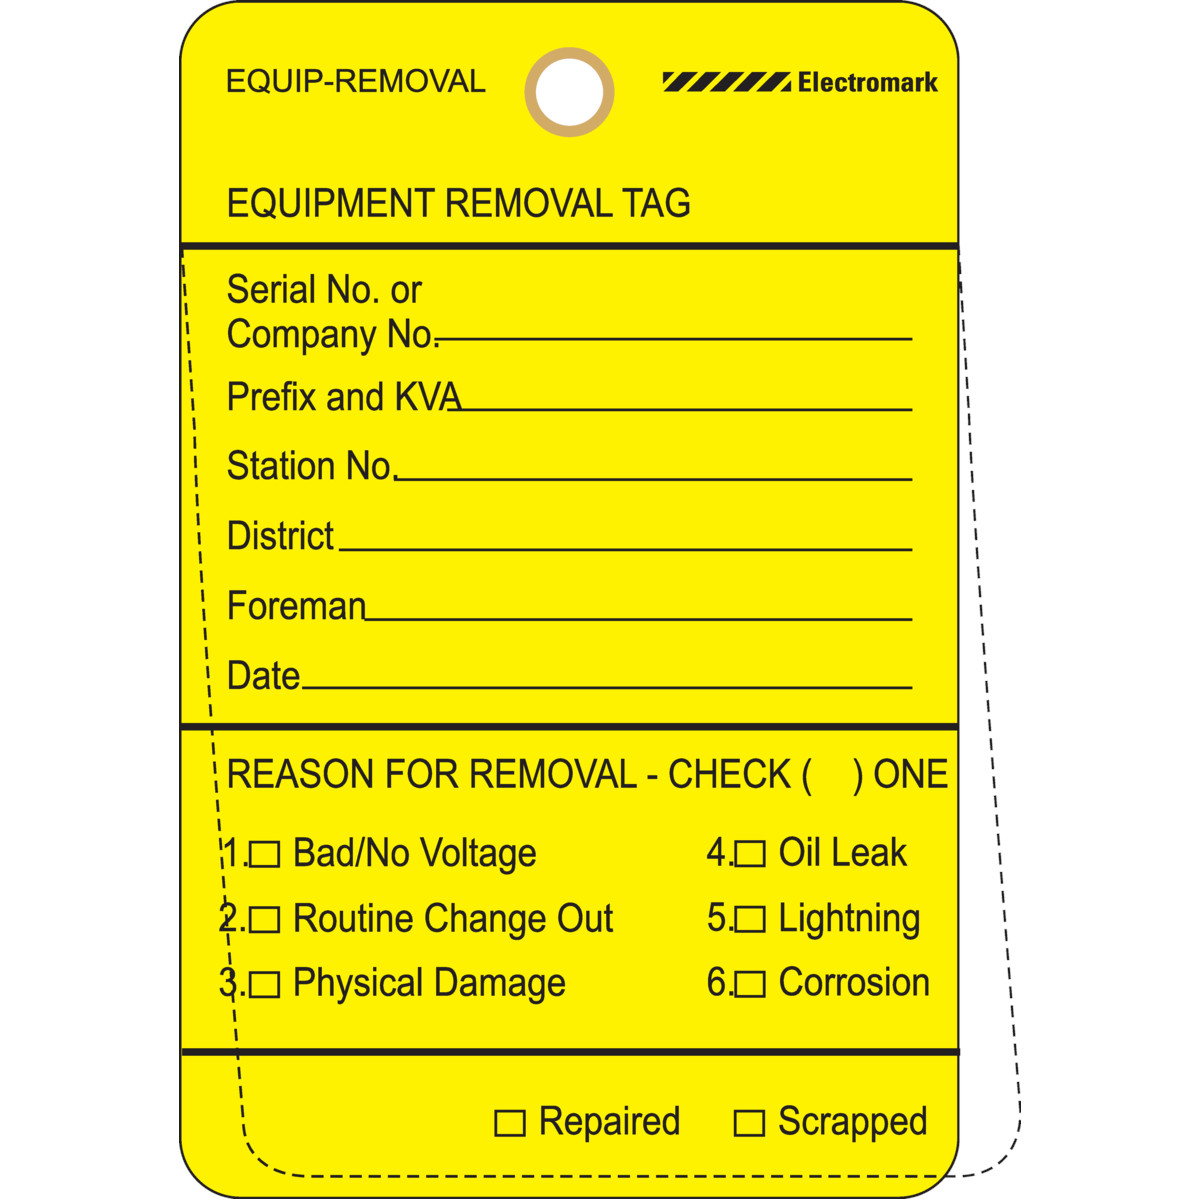 Equipment Removal Tag